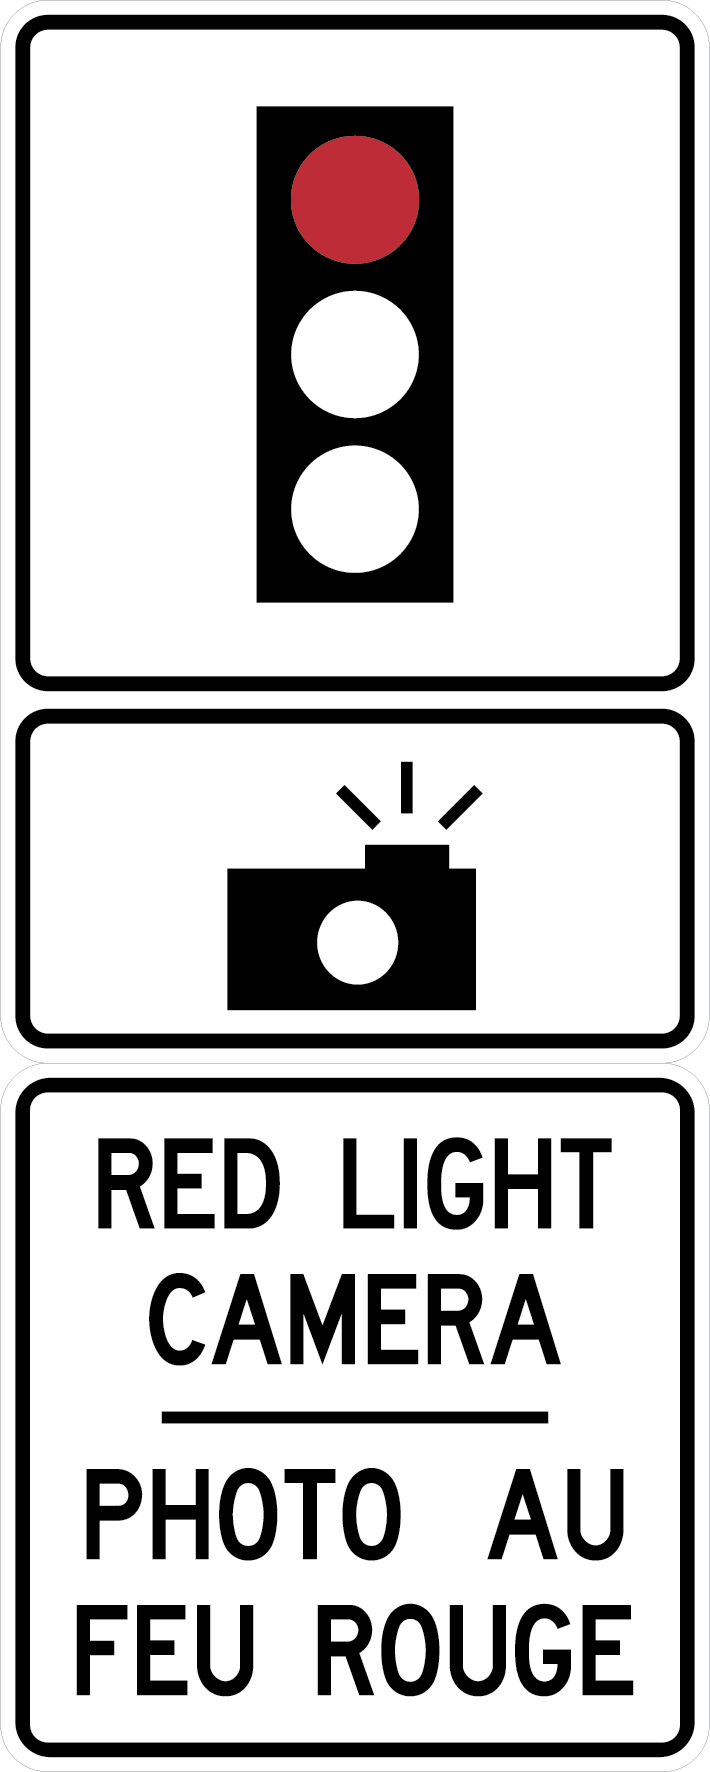 image of red light camera sign